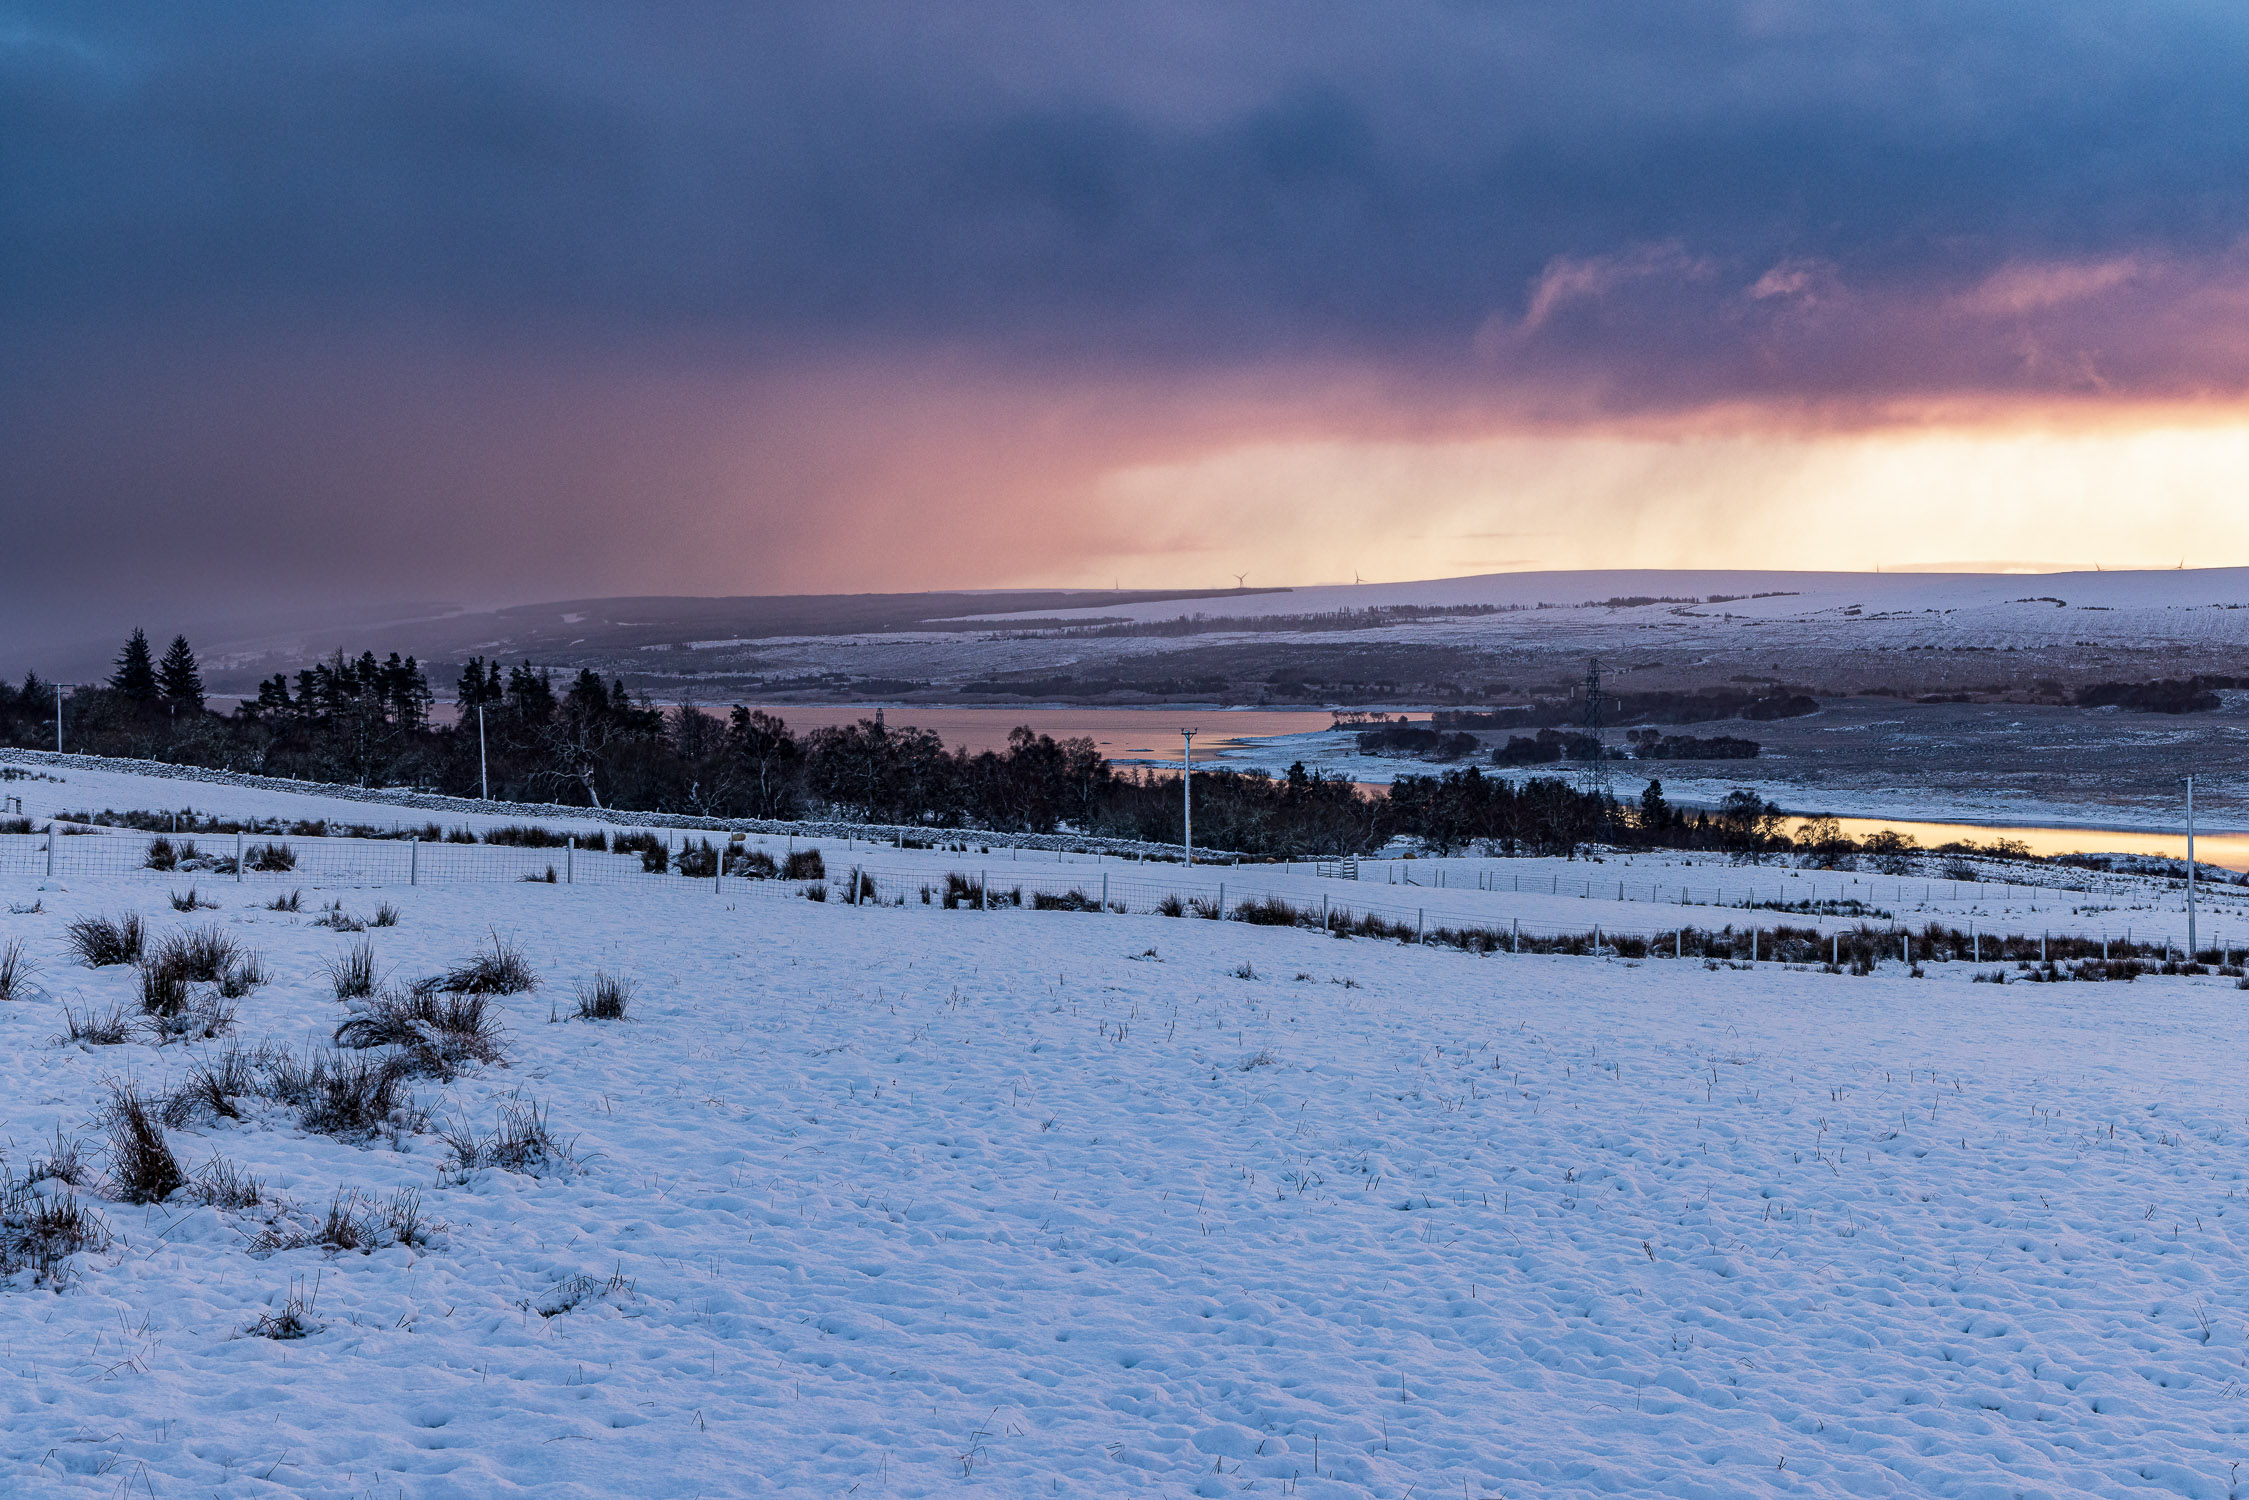 Snow showers at sunset over Loch Shin